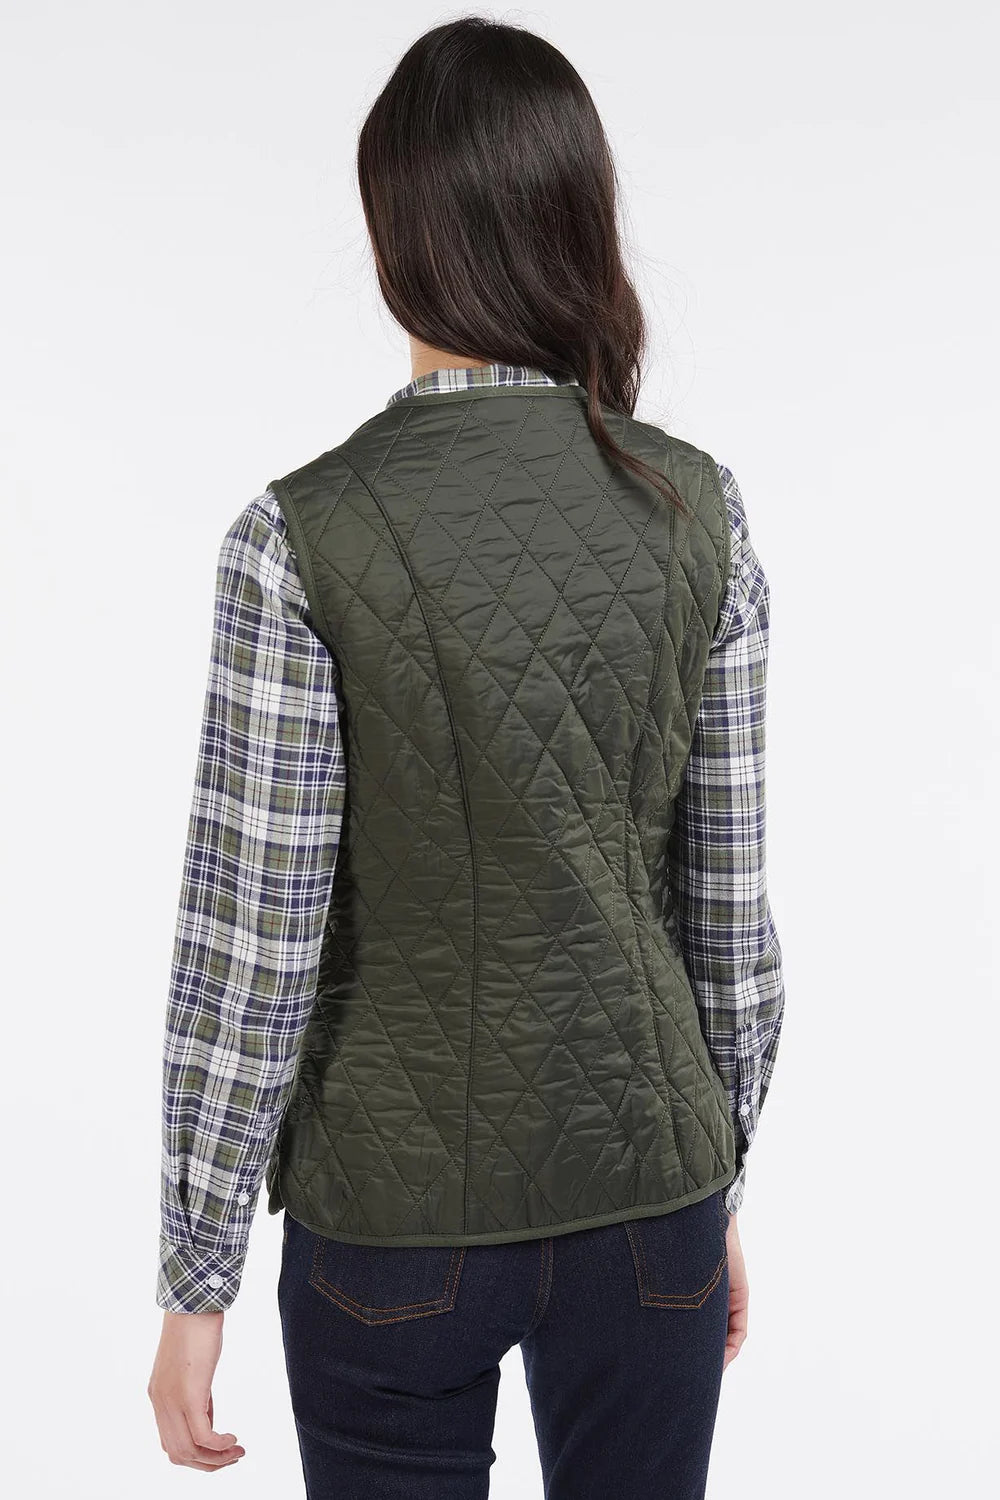 Barbour Gilet/fodera in pile Barbour Betty